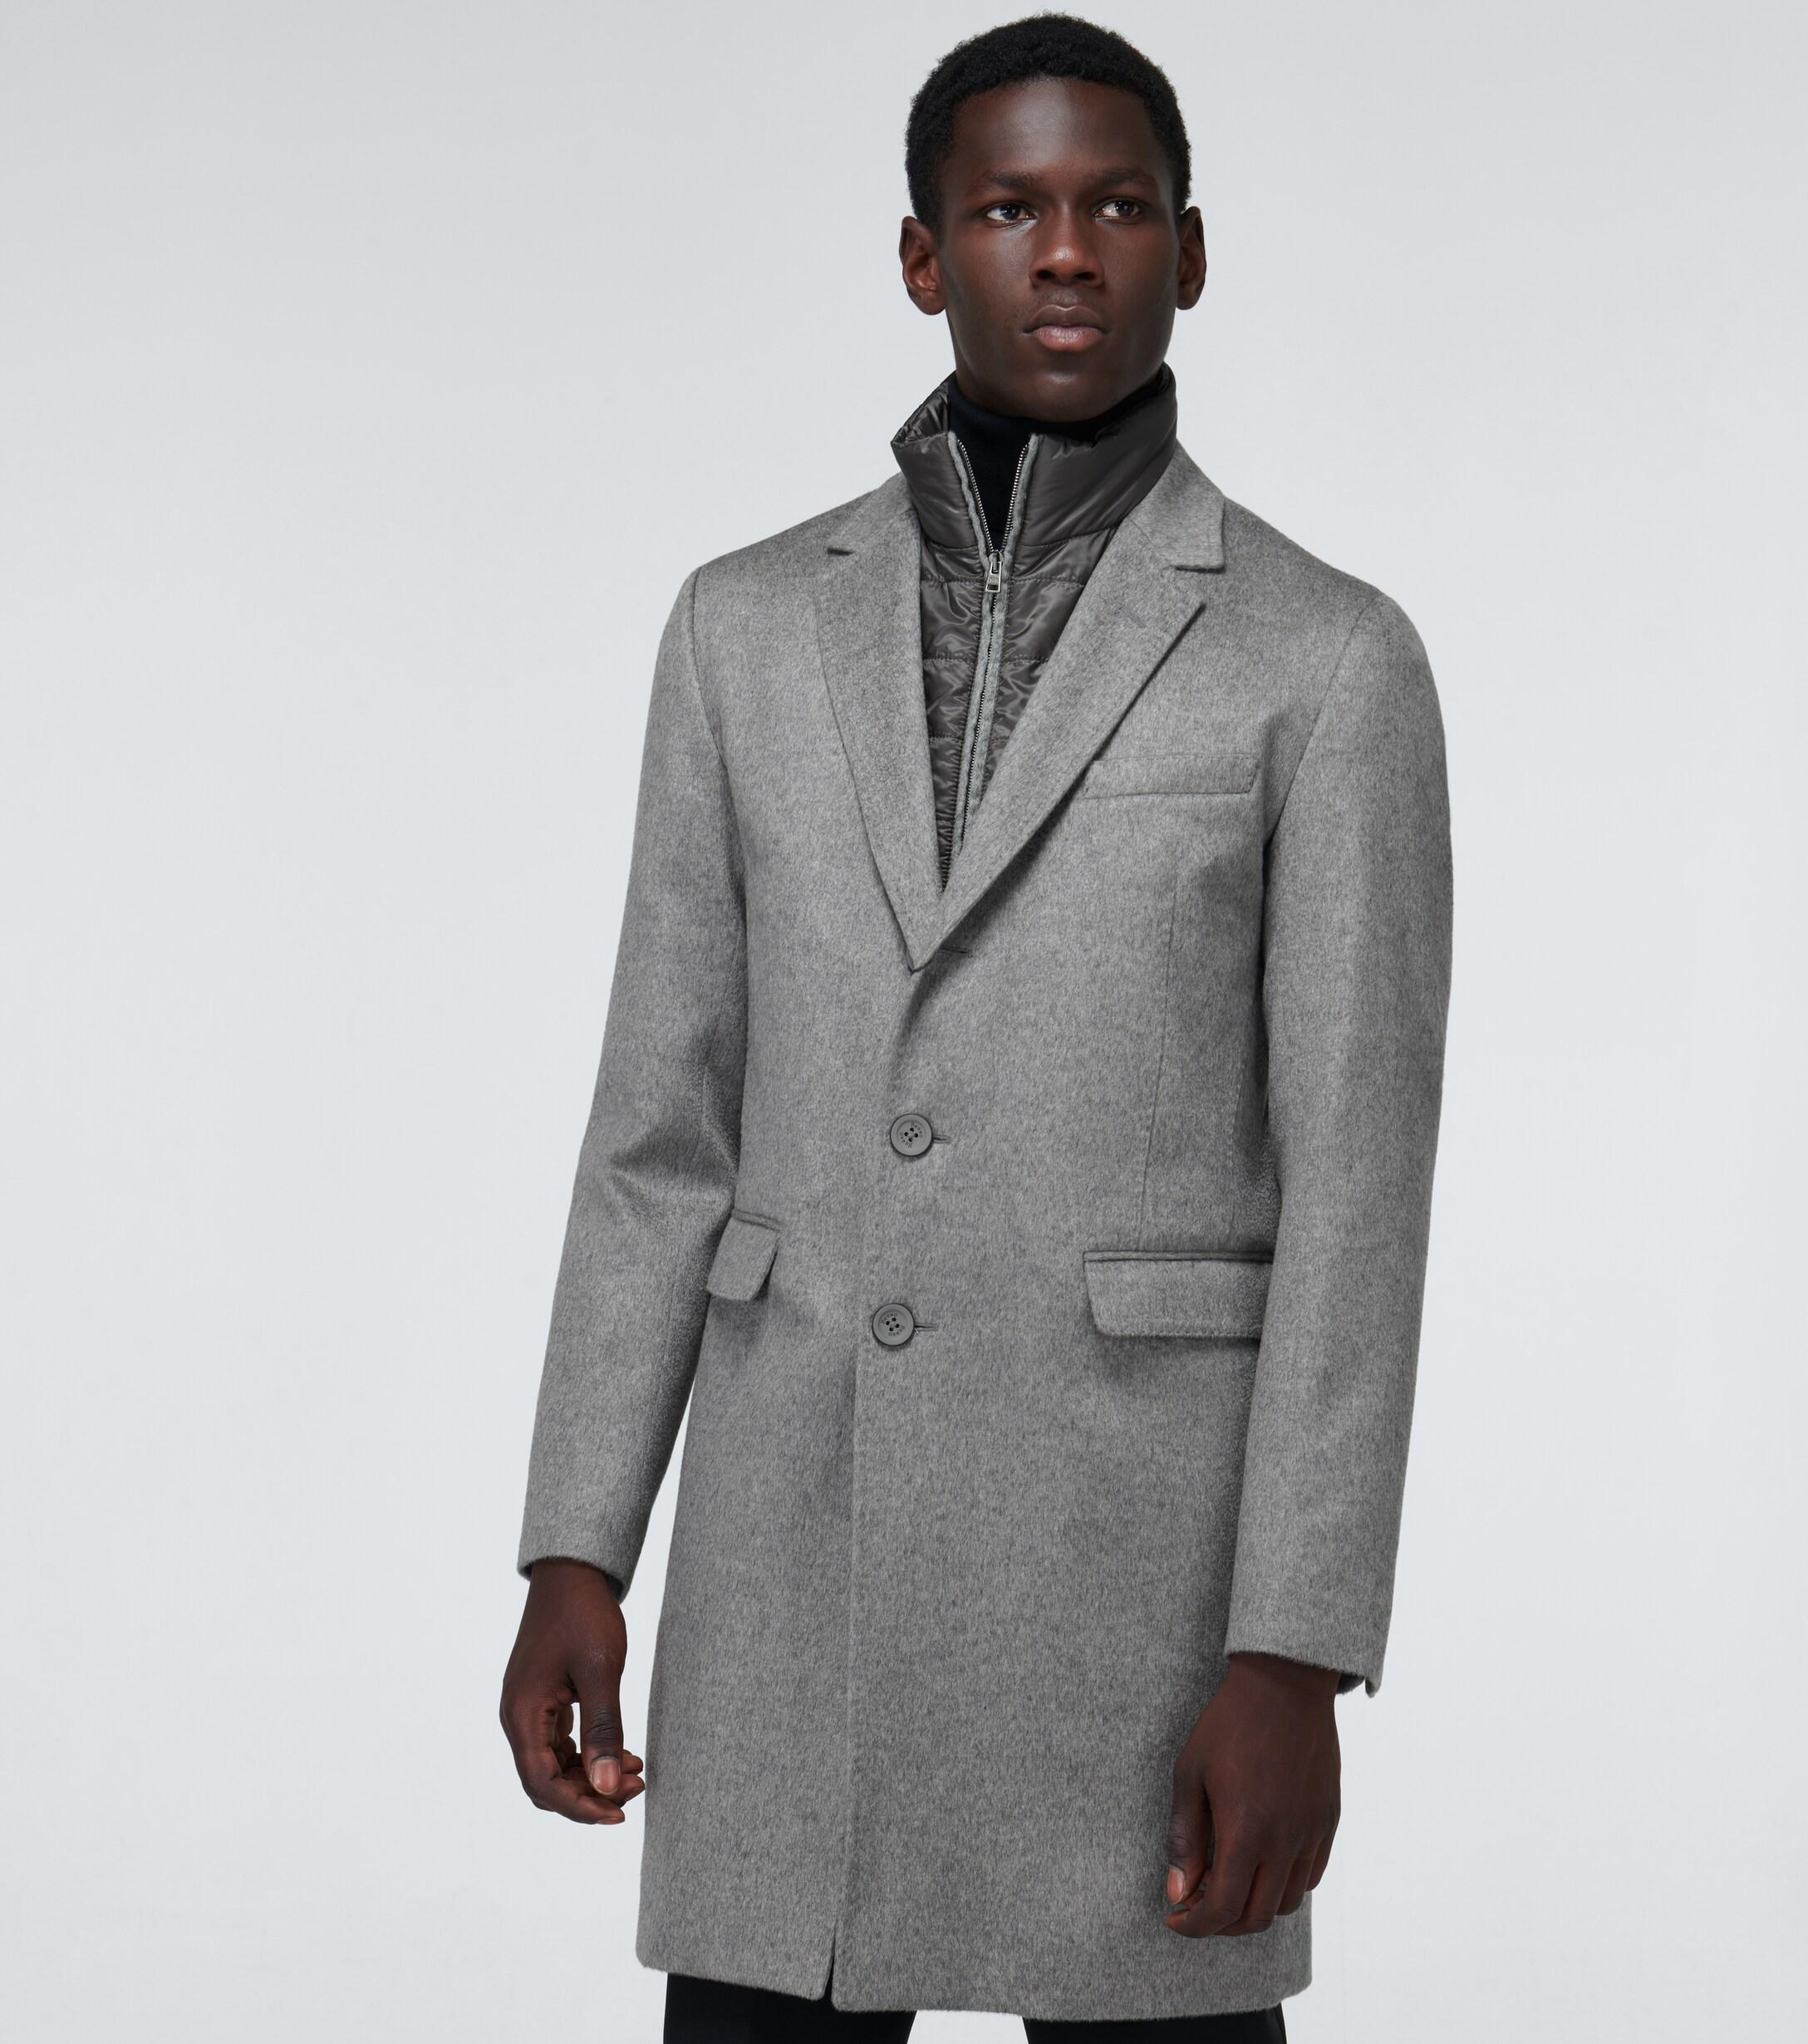 Herno Layered Cashmere Overcoat in Grey (Gray) for Men - Lyst